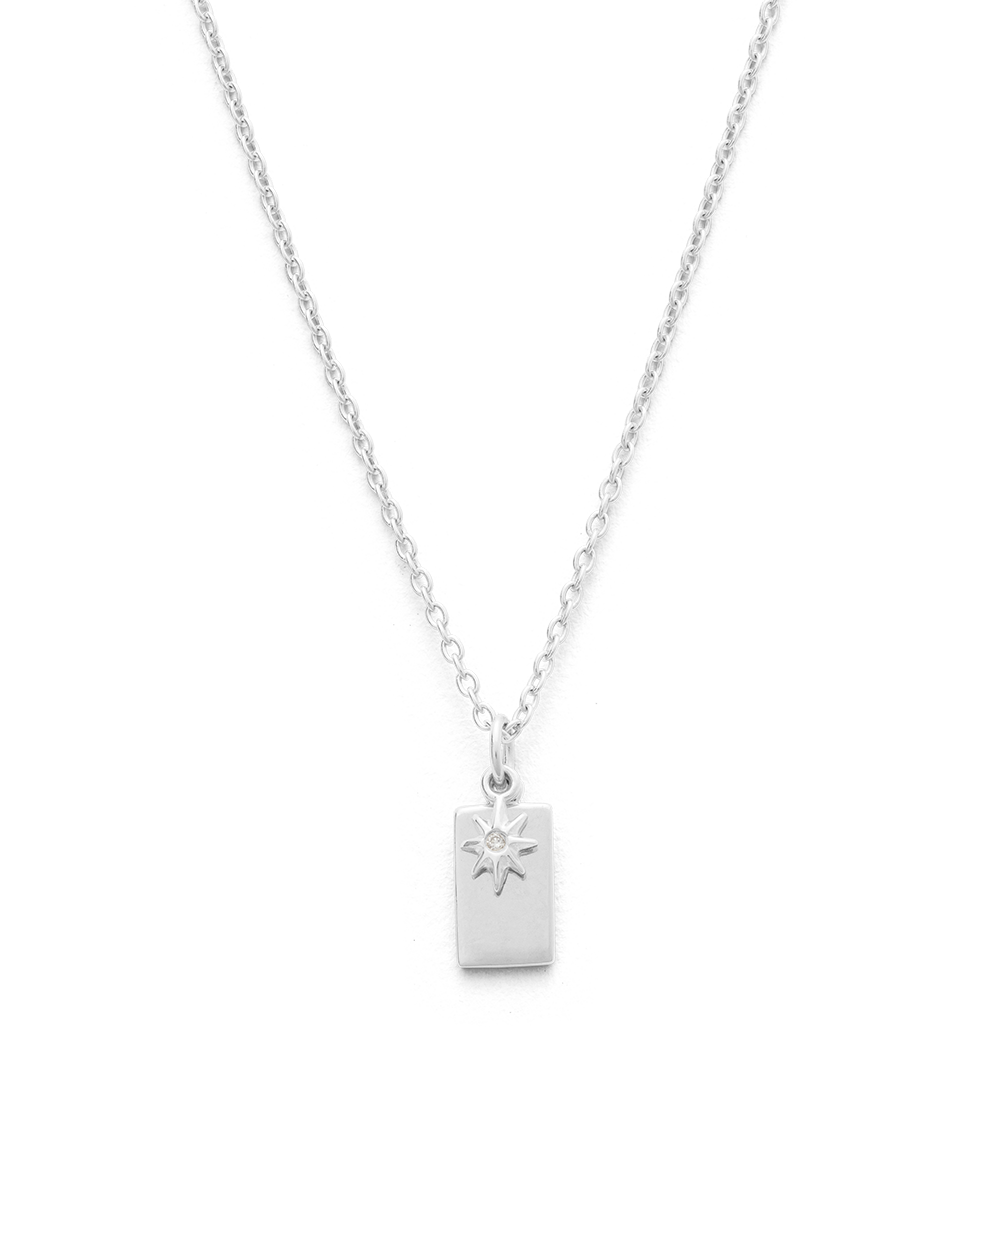 GUIDING STAR NECKLACE (STERLING SILVER)